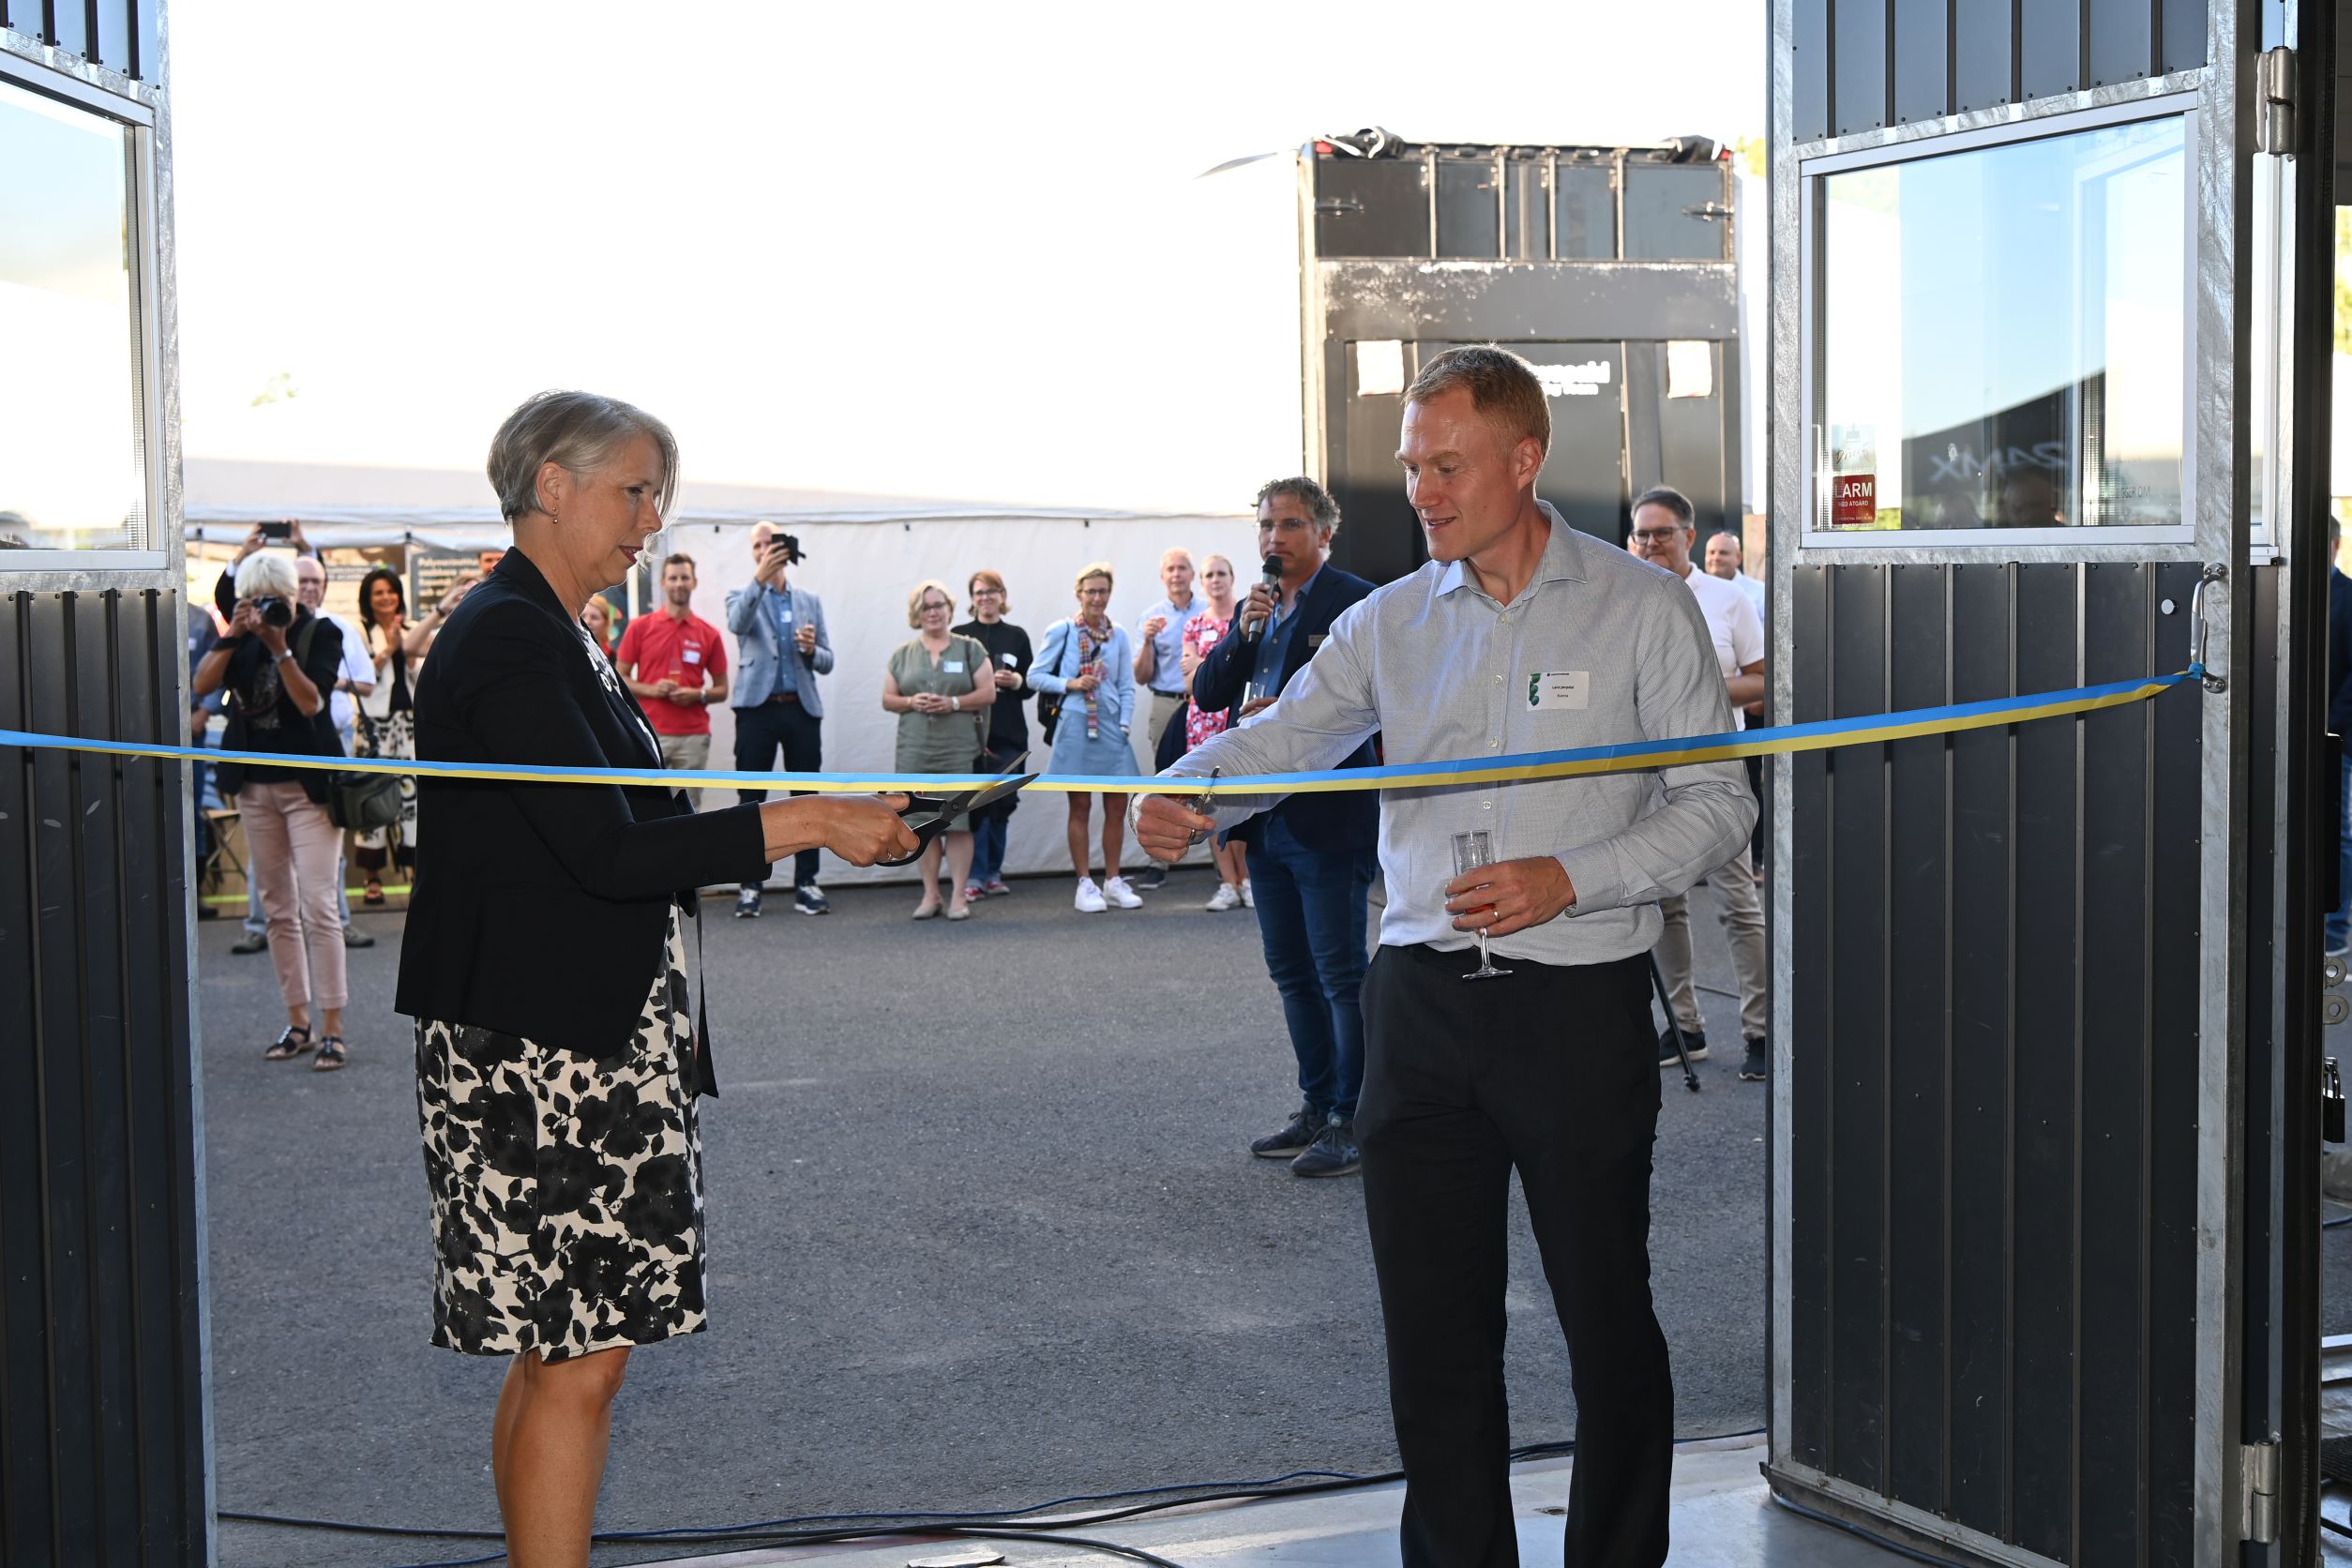 Helena Jonsson, Governor of Jönköping County, and Lars Jerpdal, Technical Manager - plastics design at Scania Group, inaugurated the Polymer Technology Institute in Värnamo.